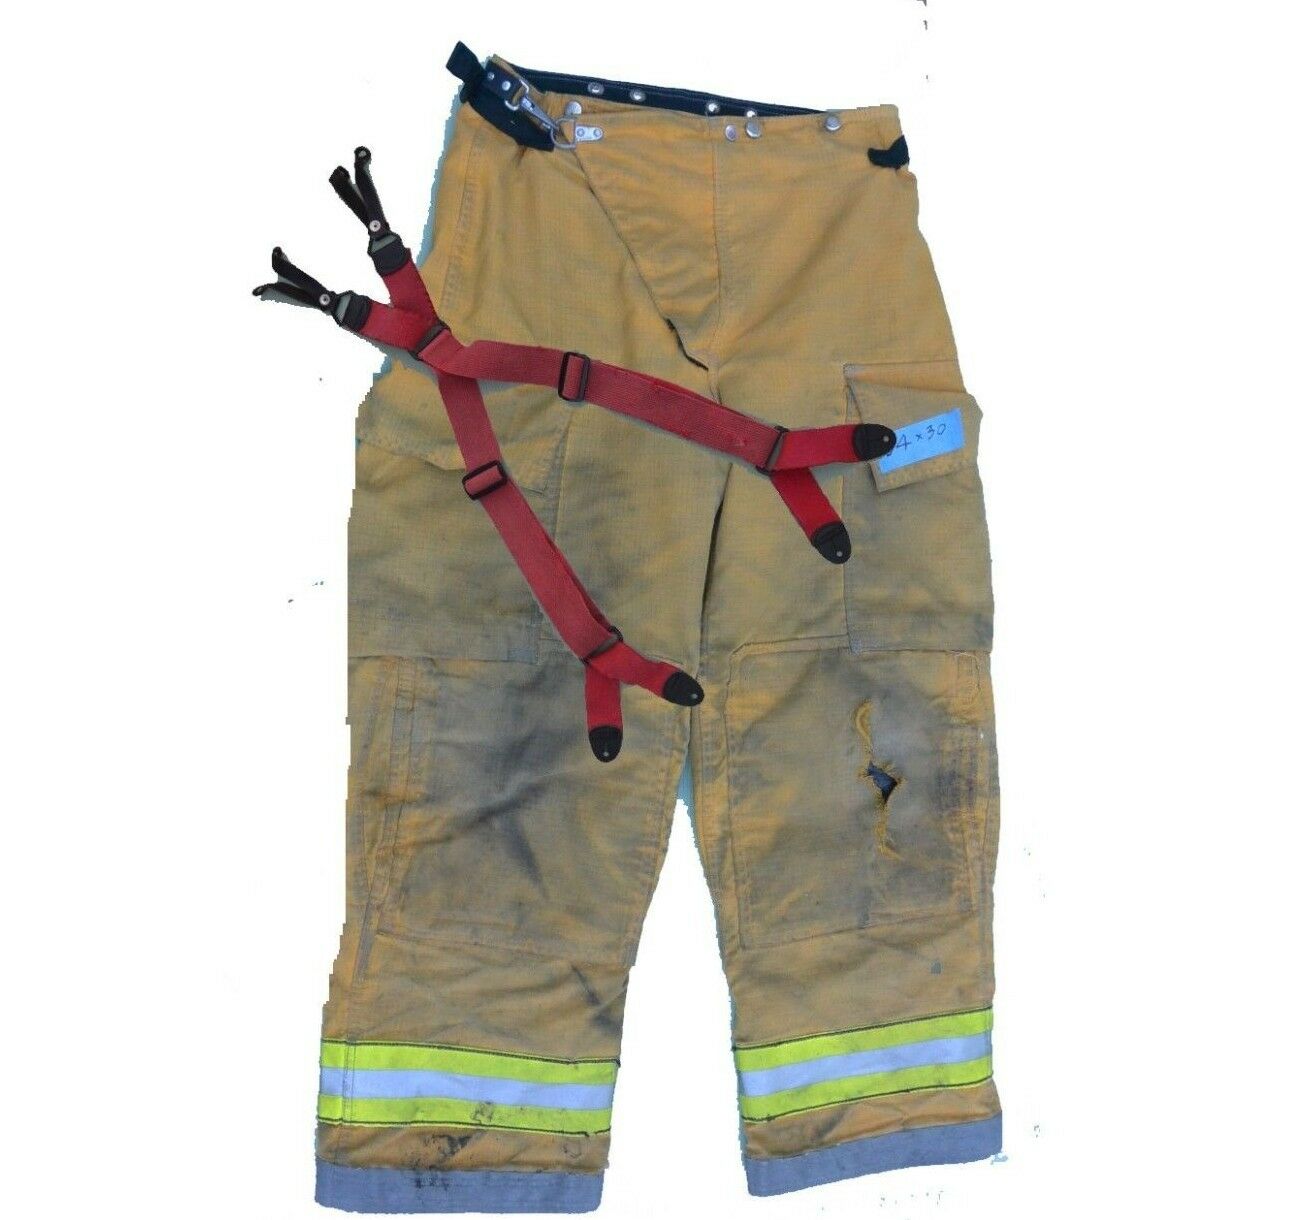 Globe Gx-7 Firefighter Turnout Pants W/suspenders (variable Sizes)